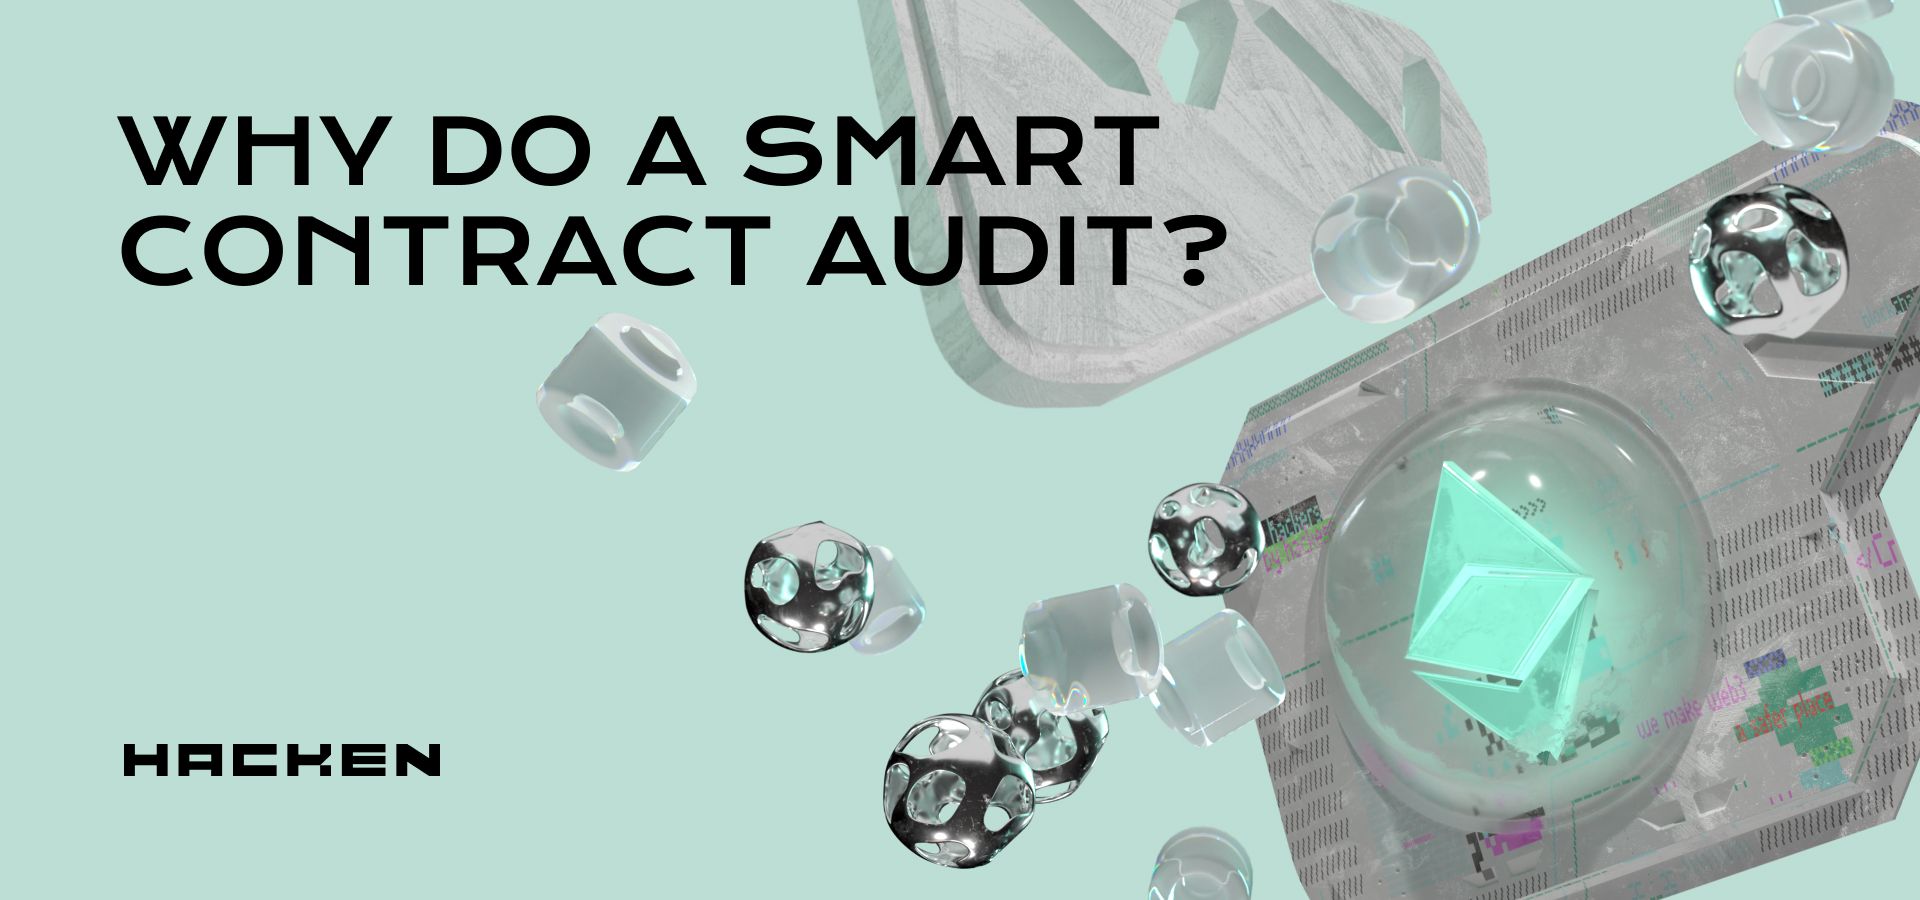 Why should your project undergo a smart contract audit?